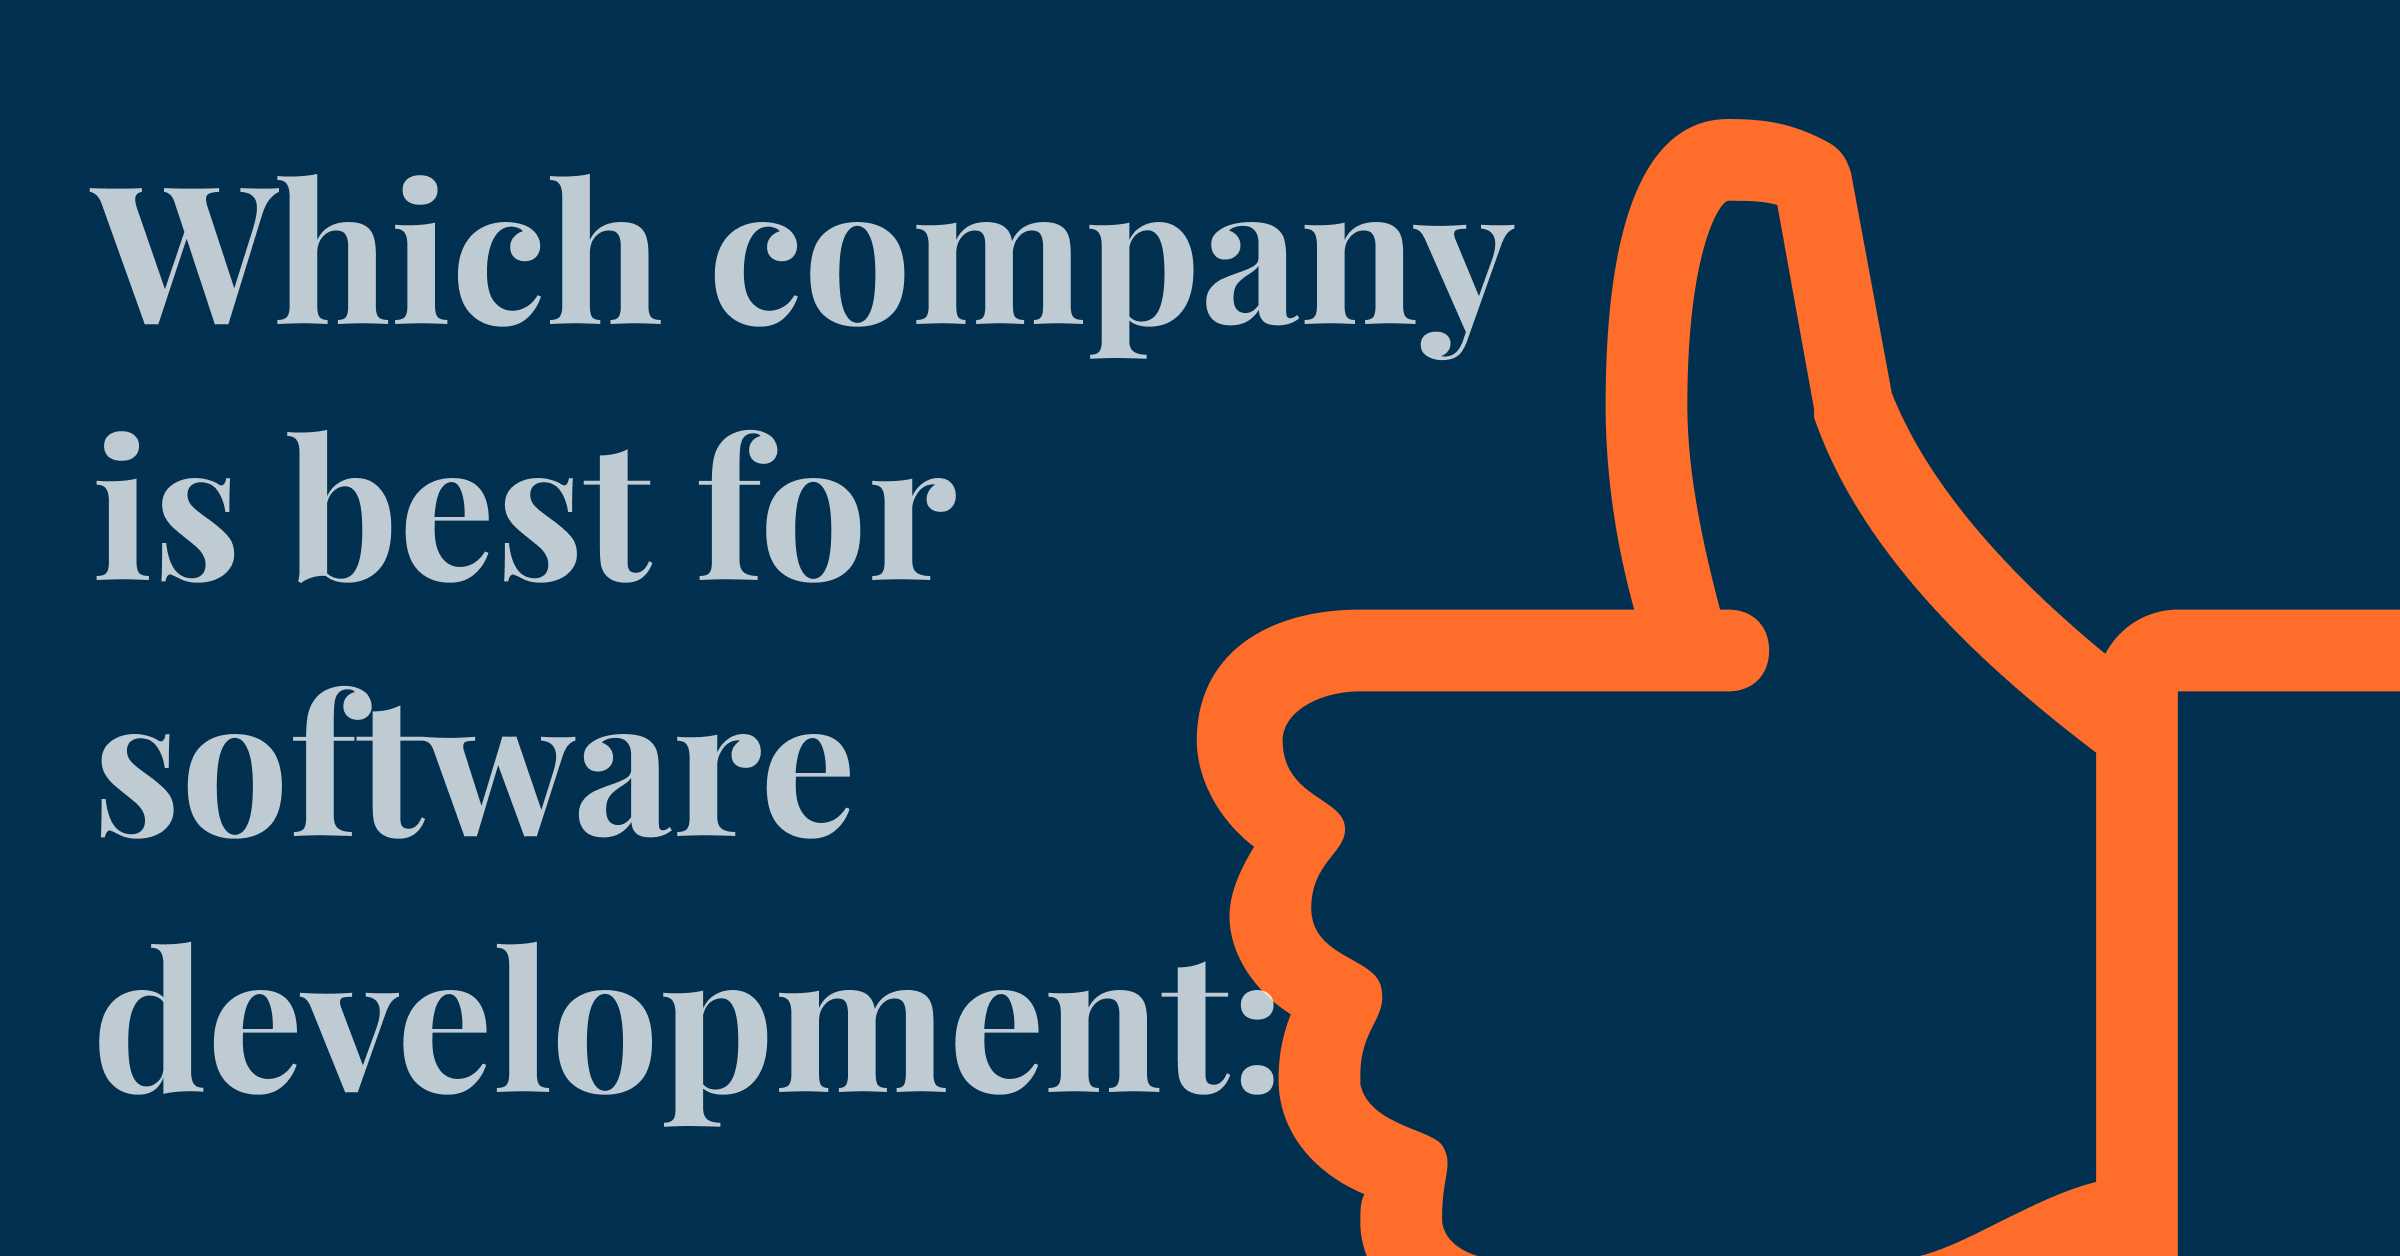 Which company is best for software development